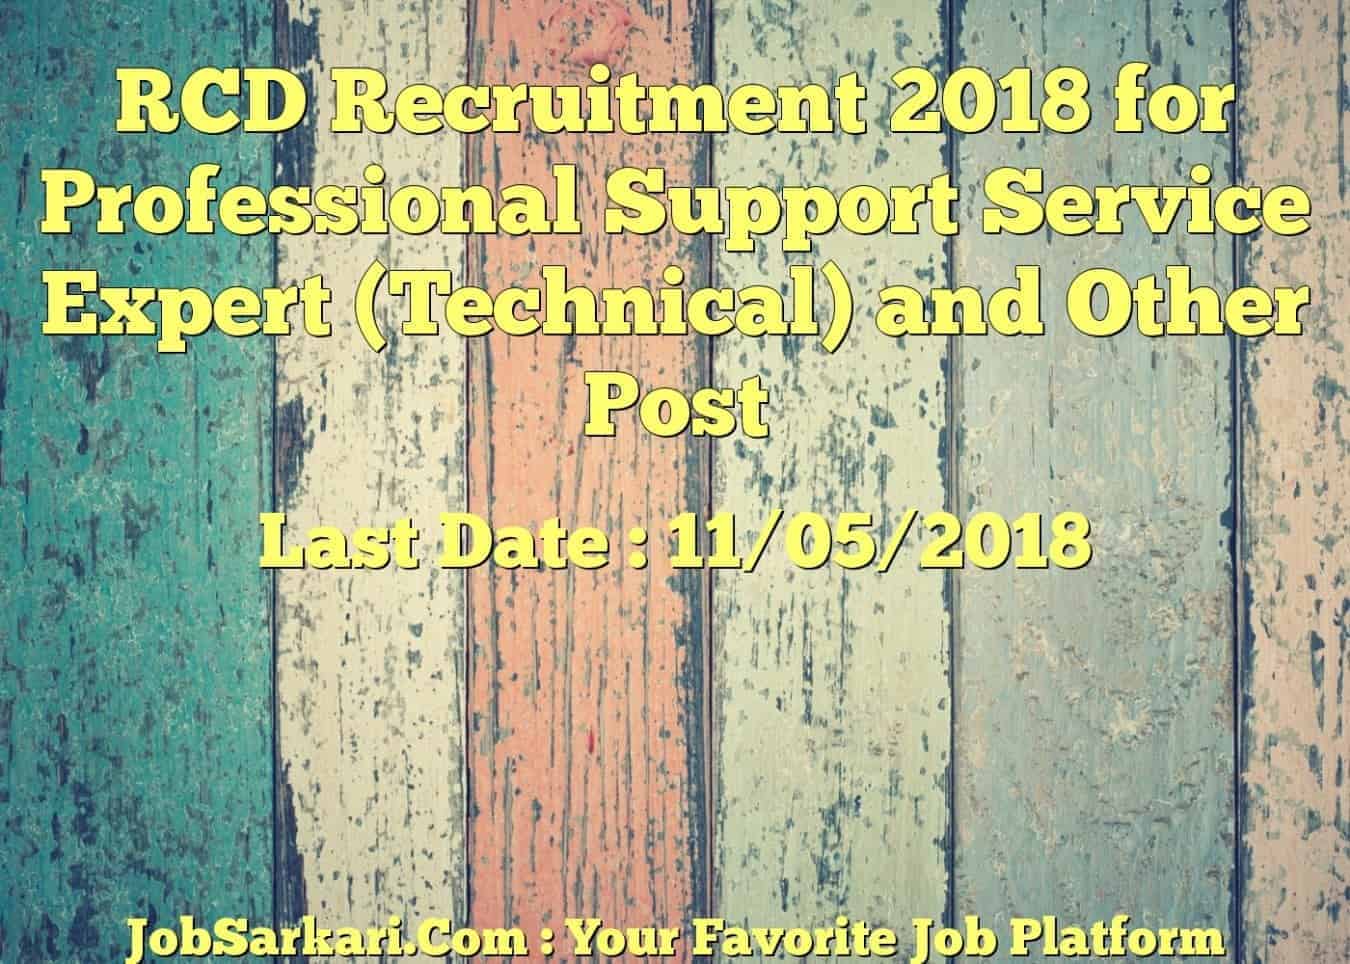 RCD Recruitment 2018 for Professional Support Service Expert (Technical) and Other Post